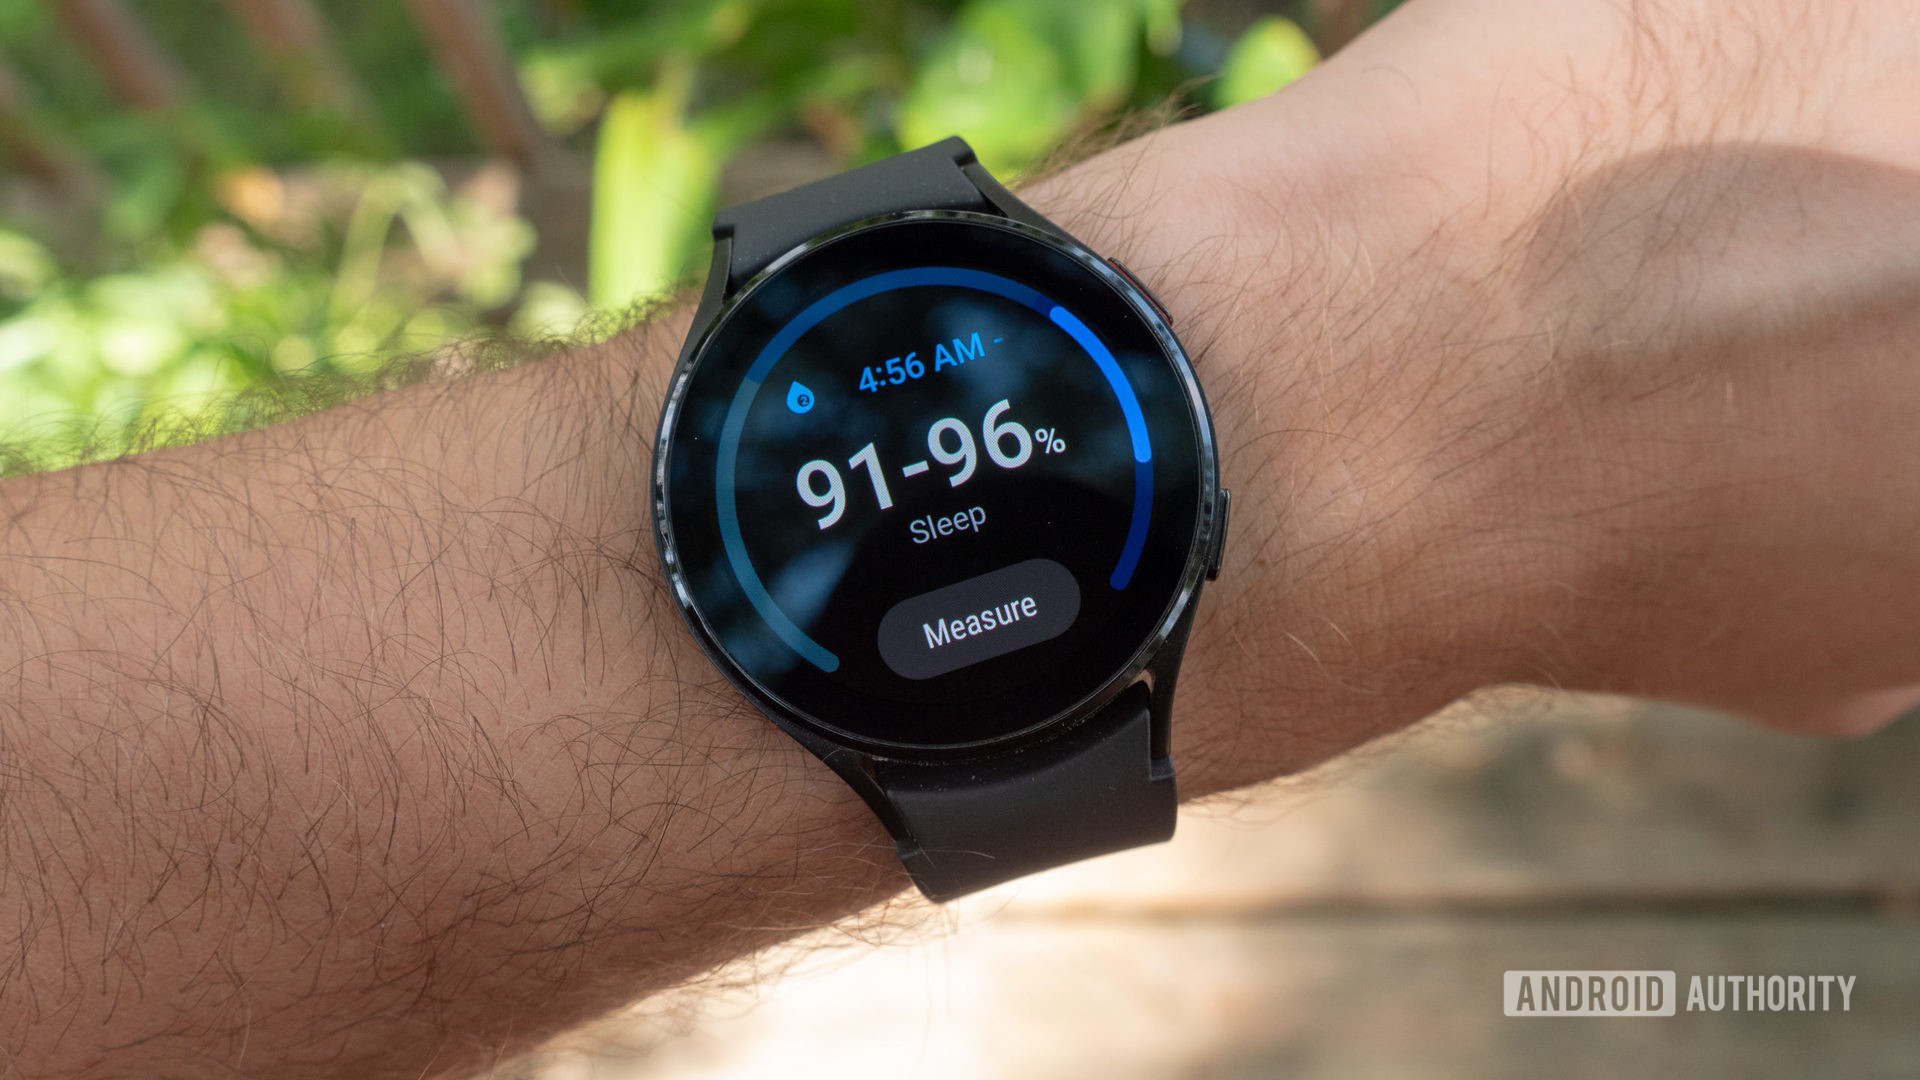 The Samsung Galaxy Watch 4 on a man's wrist shows the nighttime SpO2 monitoring screen.